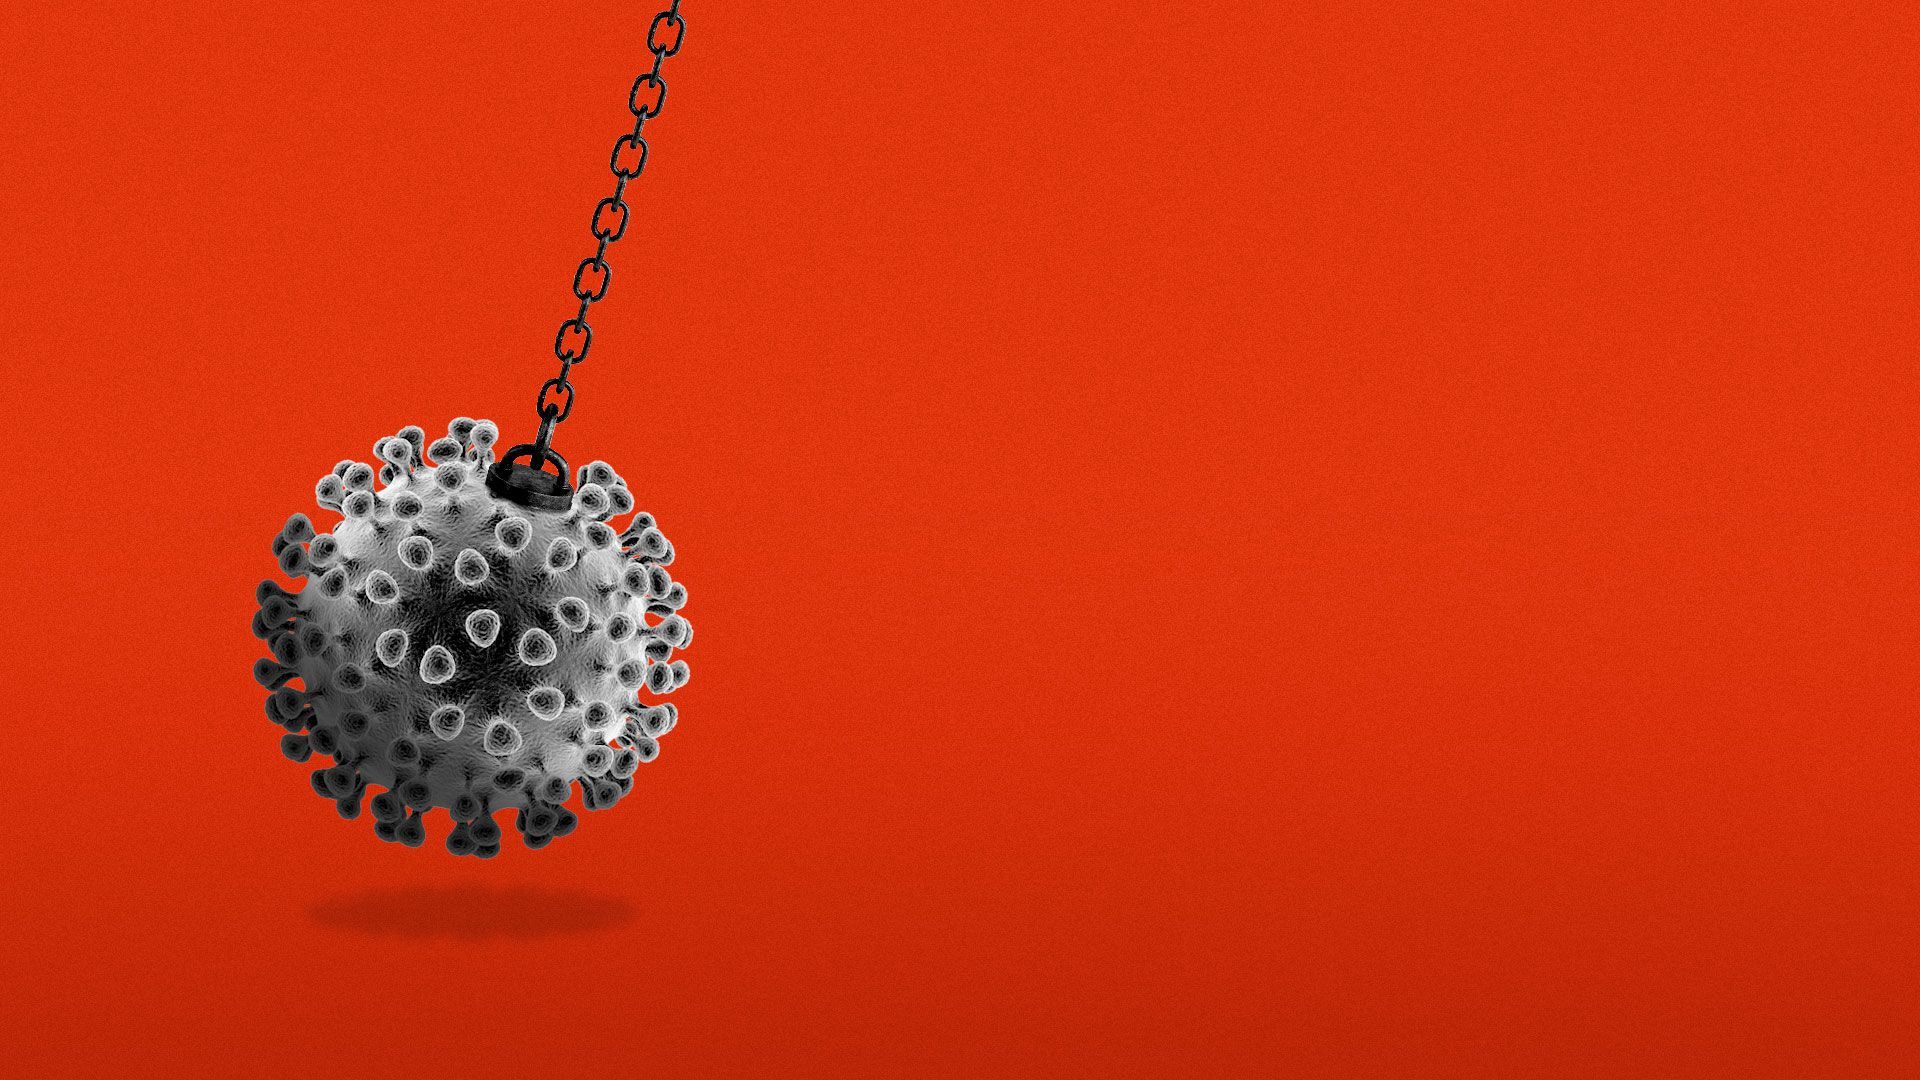 In this illustration, a wrecking ball is depicted as a germ 